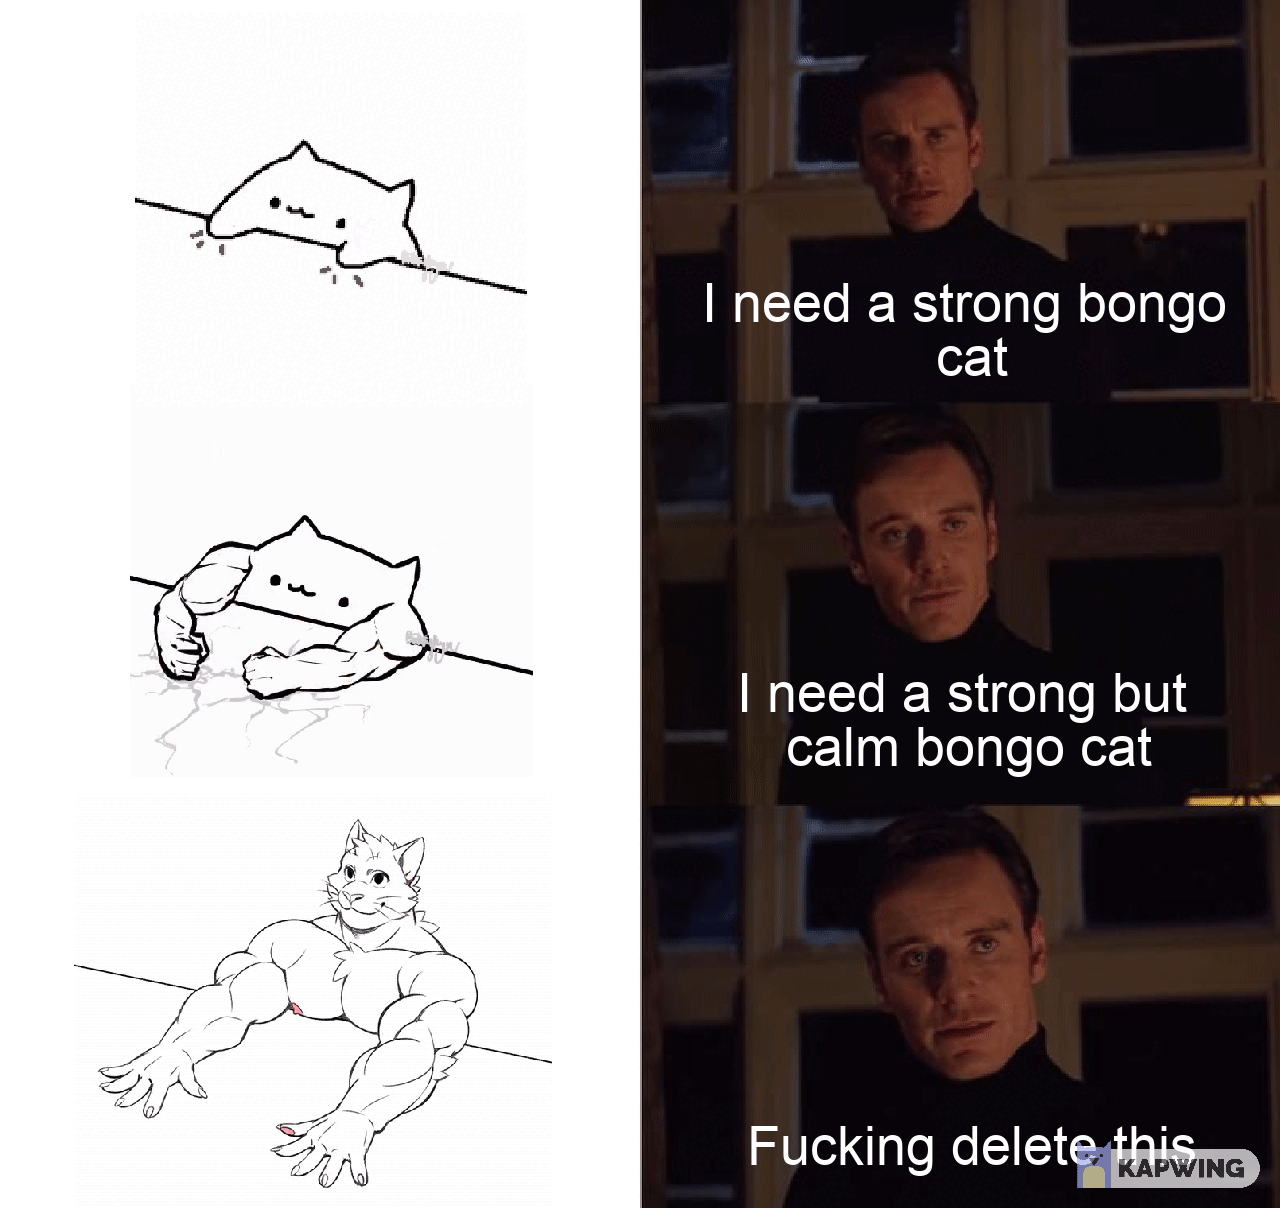 When you realize there are thousands of different versions of bongo cat